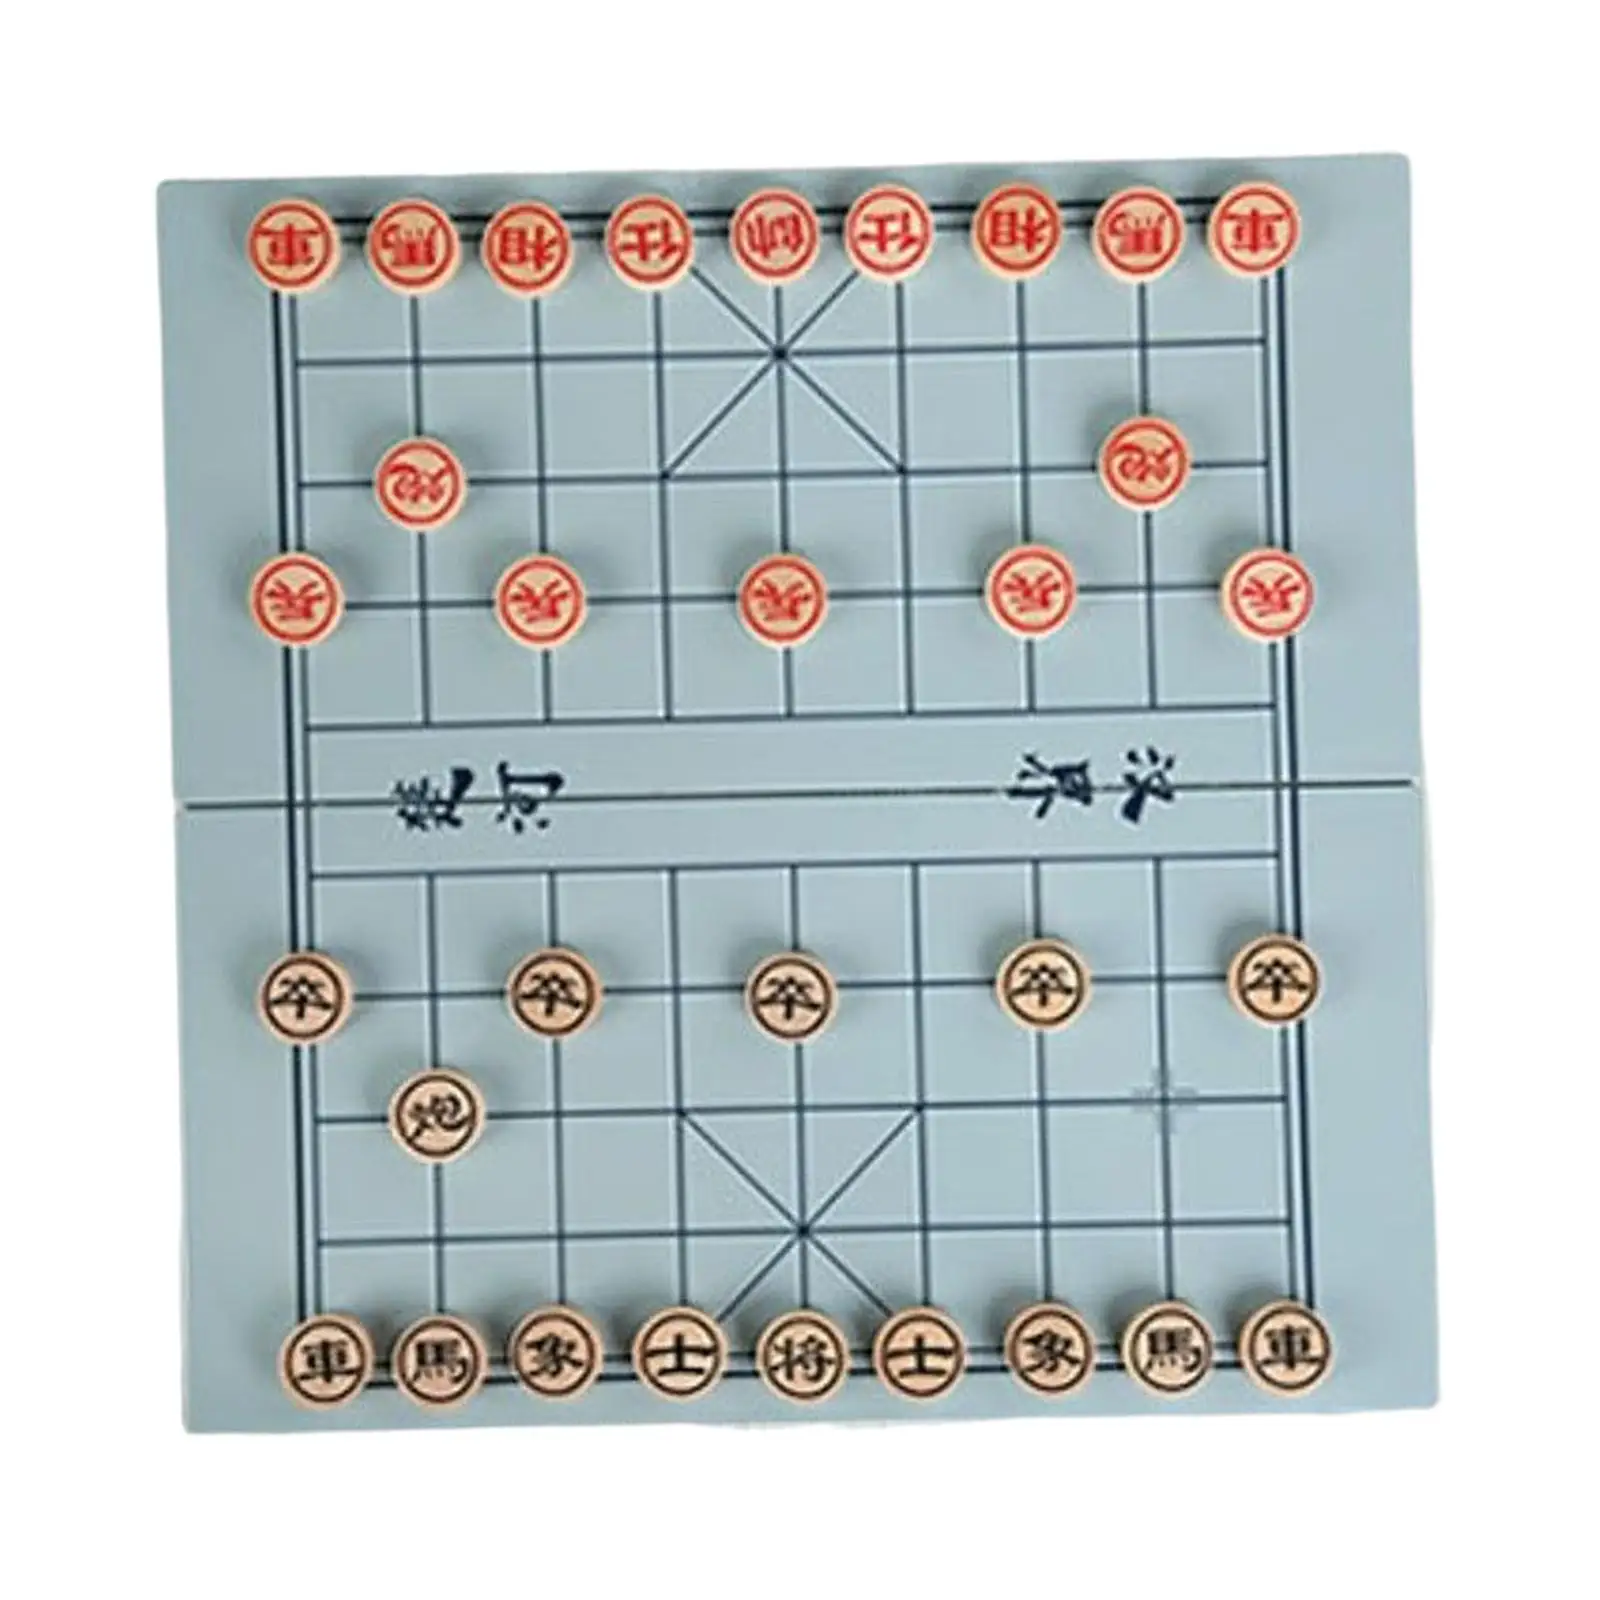 Portable Chinese Chess Set Family Board Game Xiangqi game Funny Folding China Chess for Kids Adults Gifts